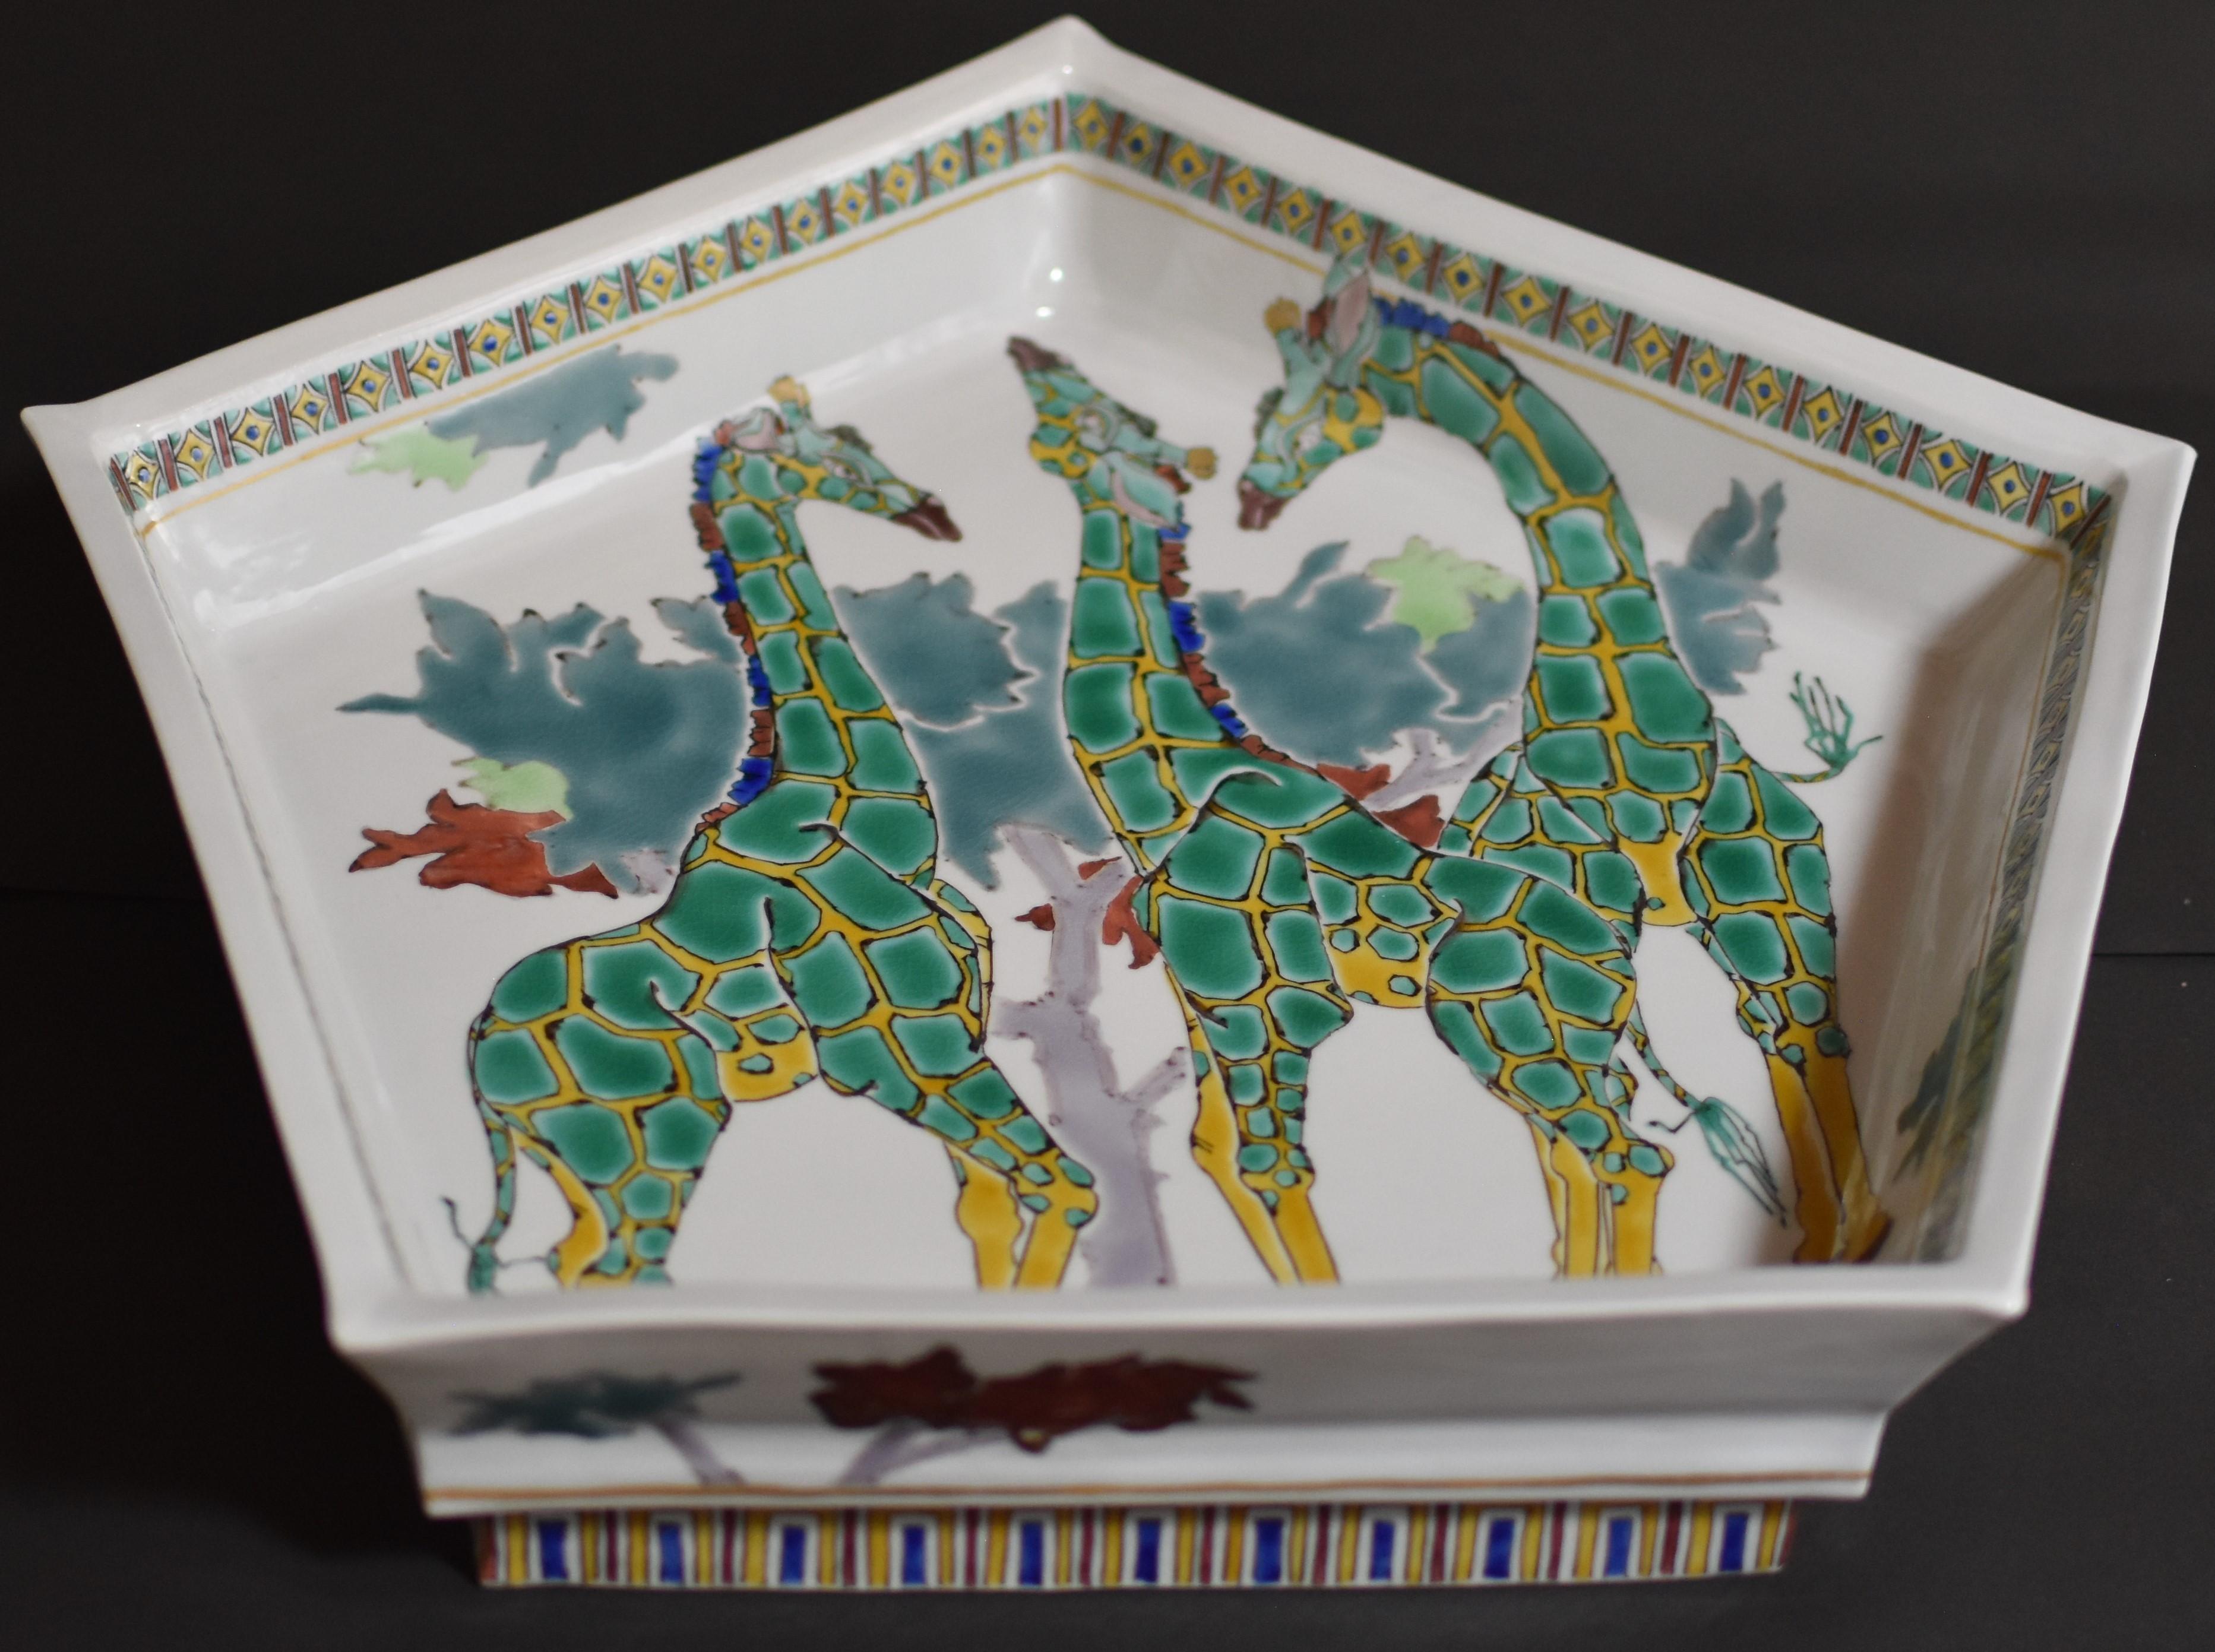 Exceptional contemporary Japanese museum-quality porcelain raised deep charger/centerpiece, hand-painted in vivid green and yellow, in a stunning Pentagon shape. It showcases a unique interpretation of giraffes and is a signed masterpiece by a